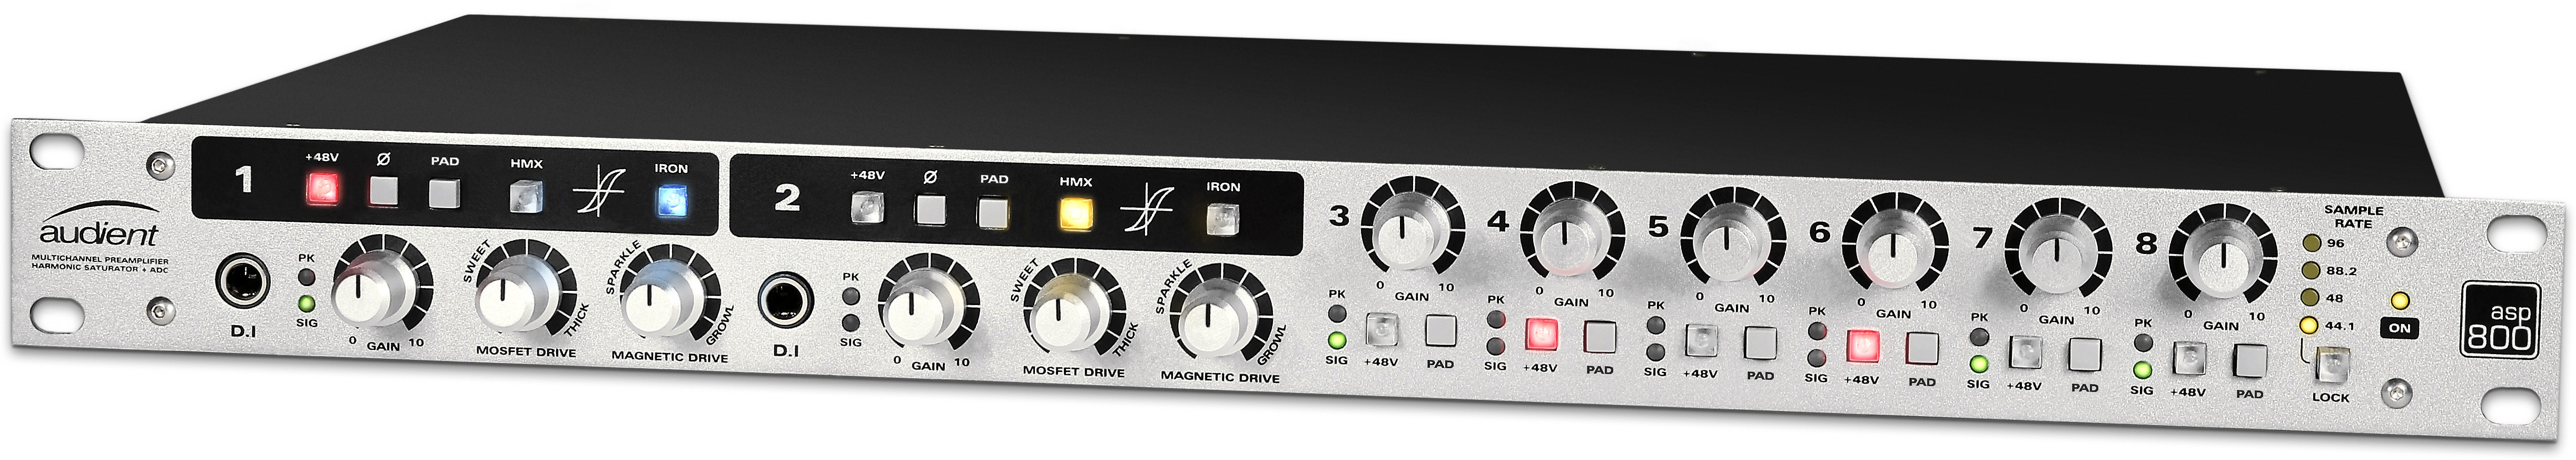 Audient Asp800 - Preamp - Main picture